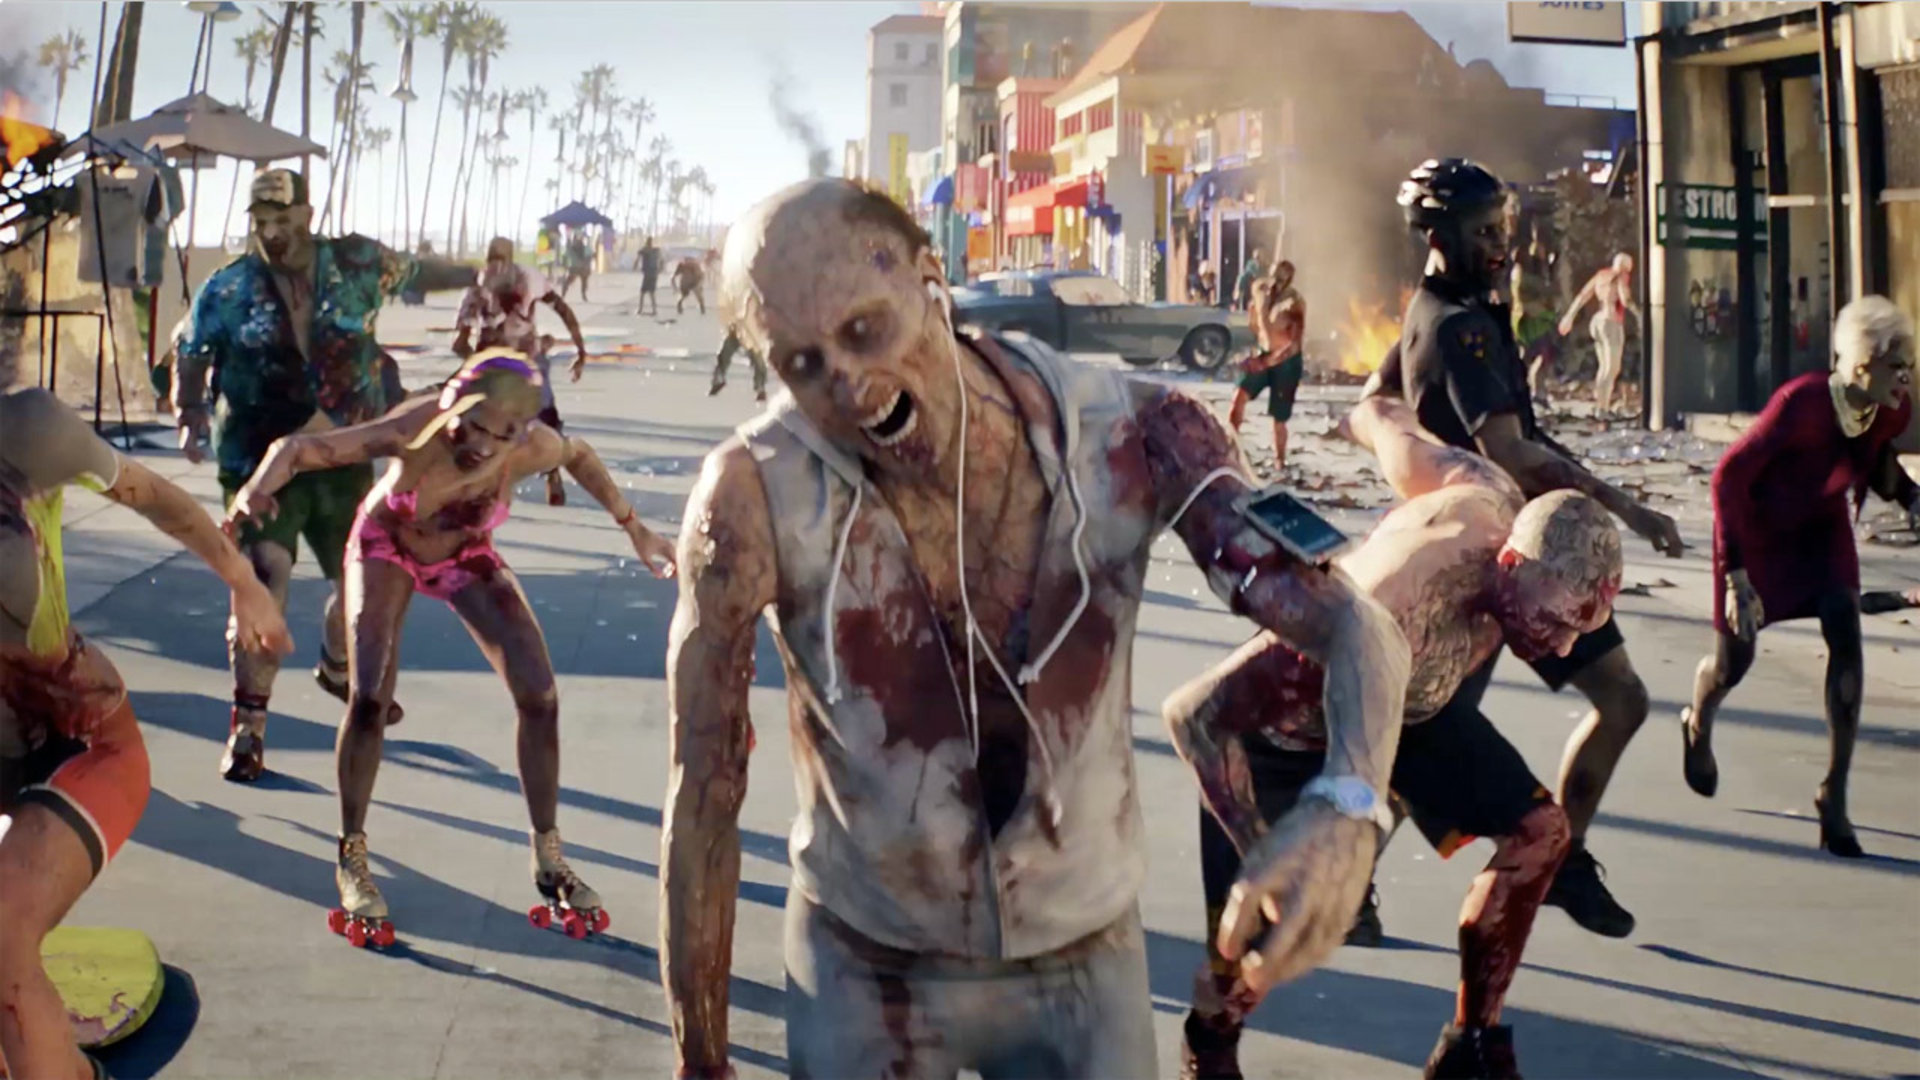 “Dead Island 2” Delayed to 2016 - Wanted to Improve Quality 